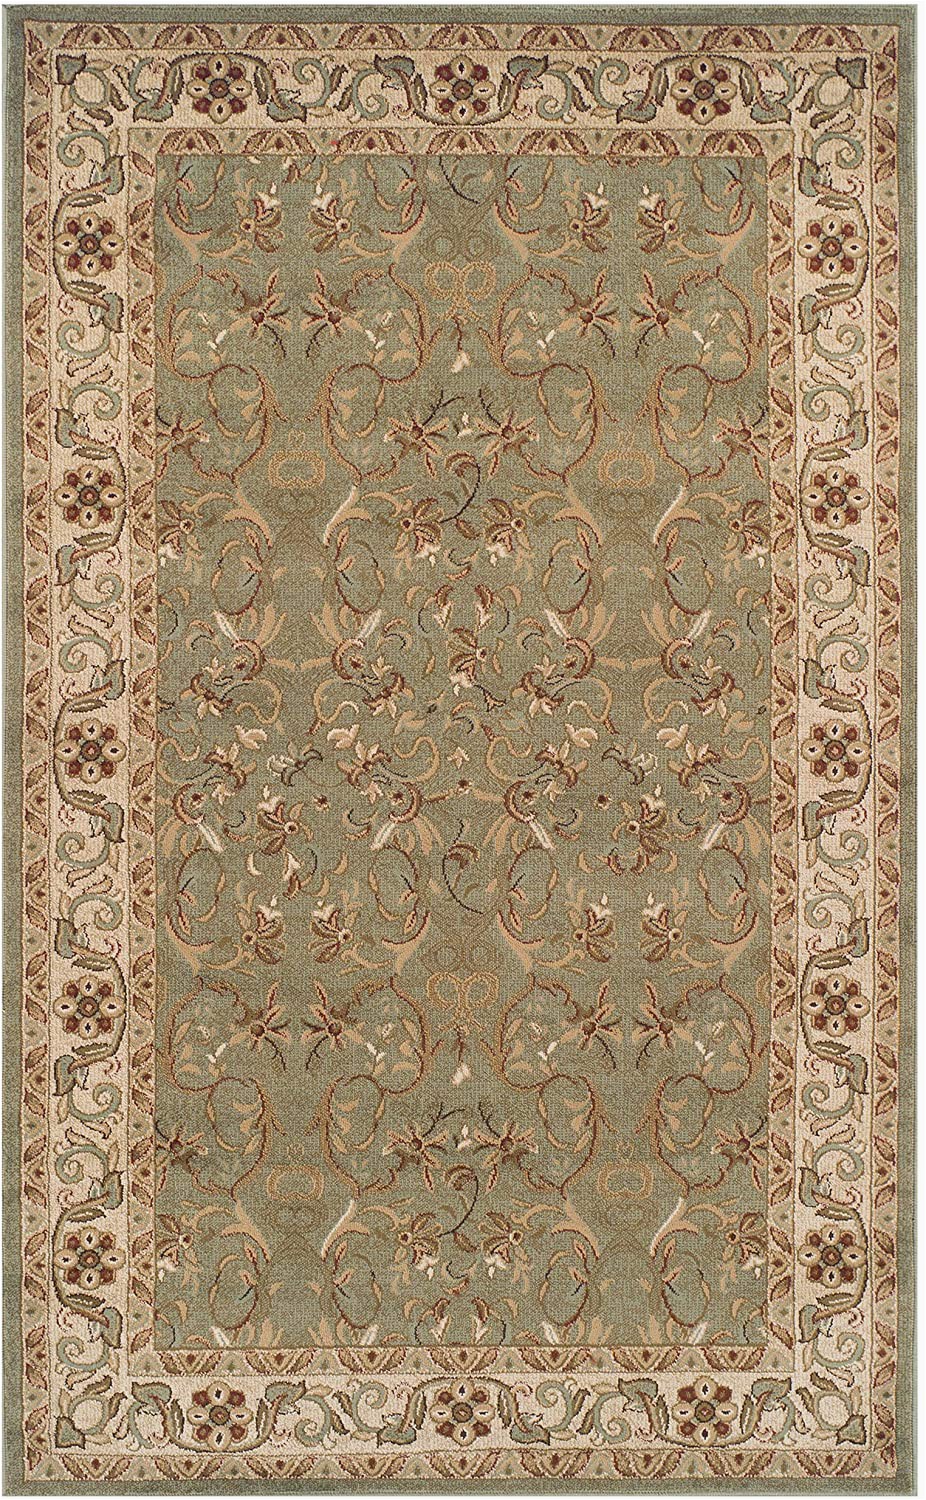 Area Rugs 10 Feet by 12 Feet Superior Heritage 8 X 10 Green area Rug Contemporary Living Room & Bedroom area Rug Anti Static and Water Repellent for Residential or Mercial